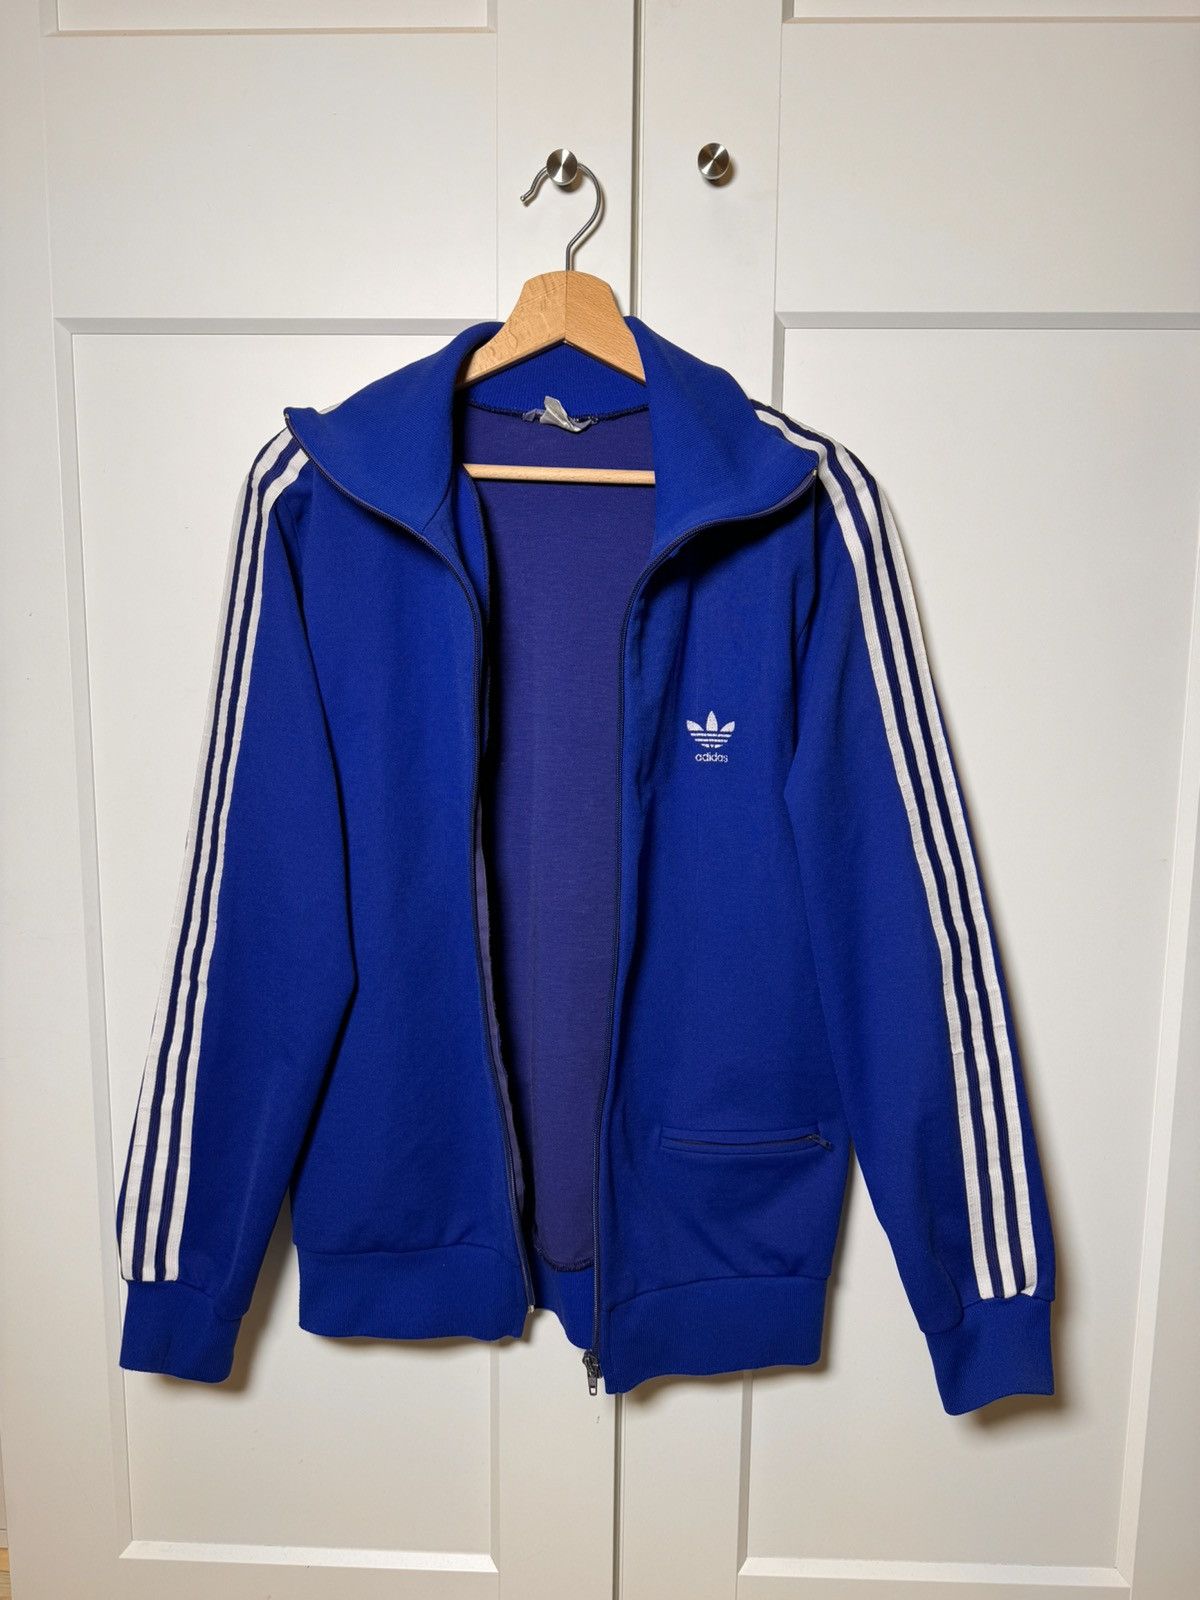 Adidas Adidas 70s Track Top Olympic Jacket Size US L / EU 52-54 / 3 - 2 Preview